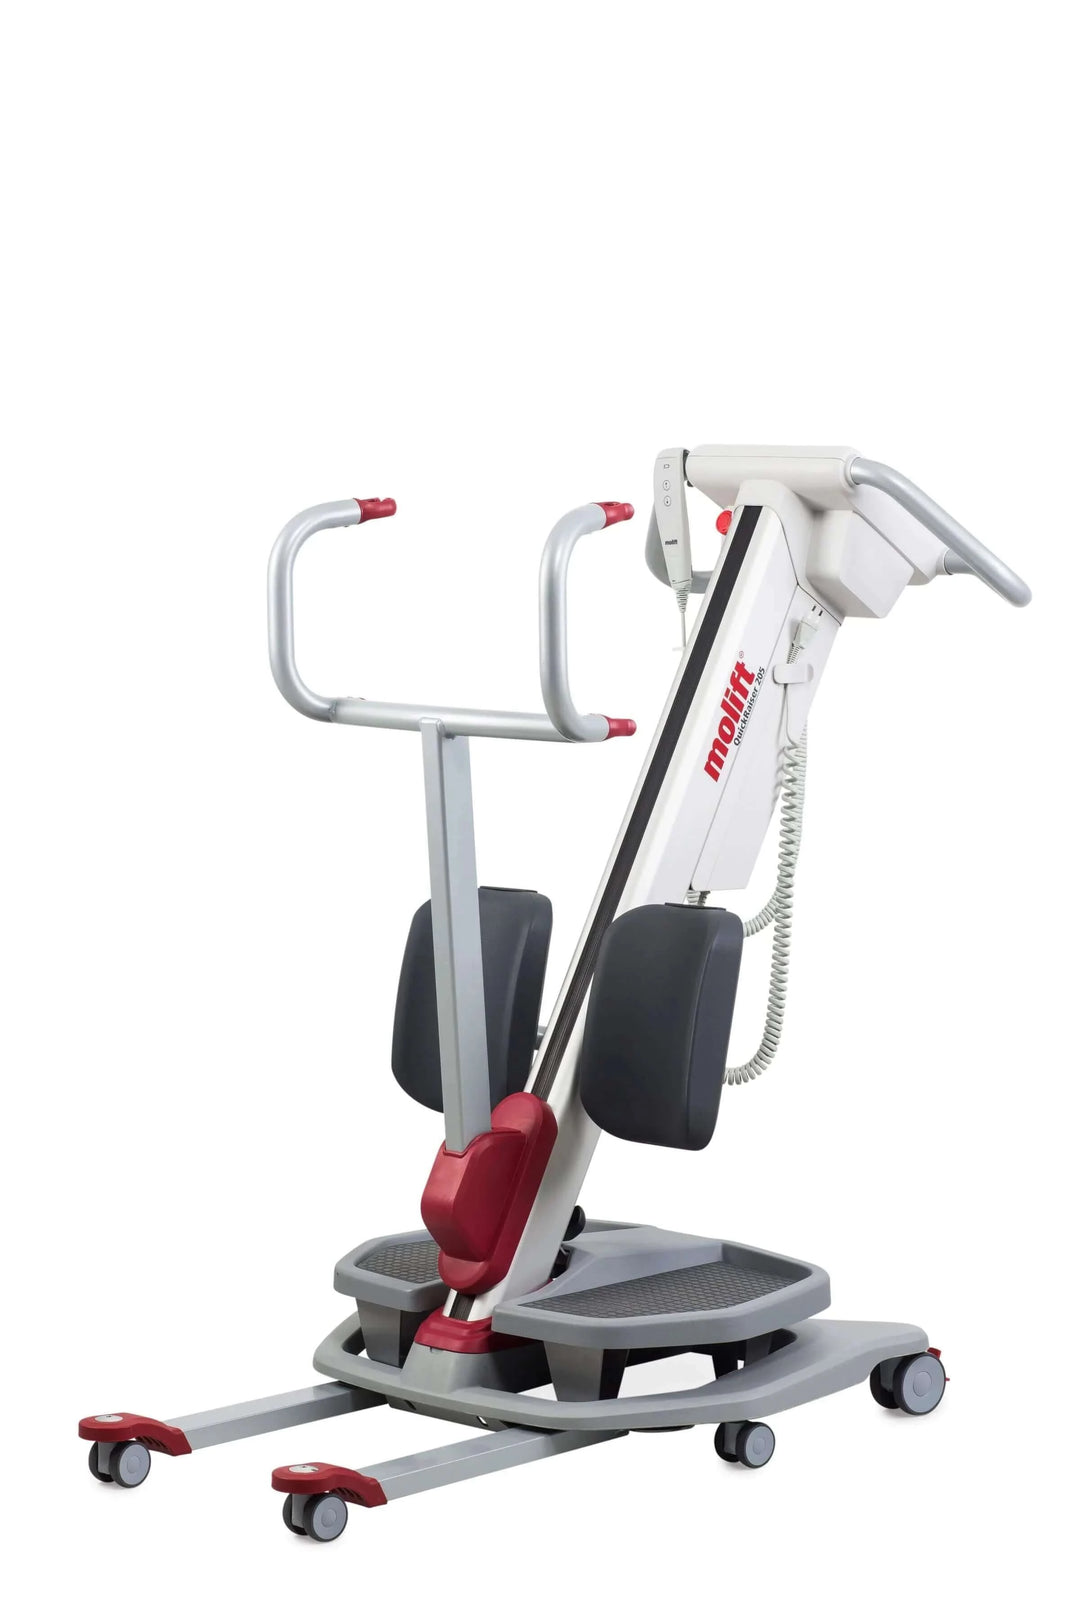  Molift - Quick Raiser 205 Sit-To-Stand Patient Lift - with white background